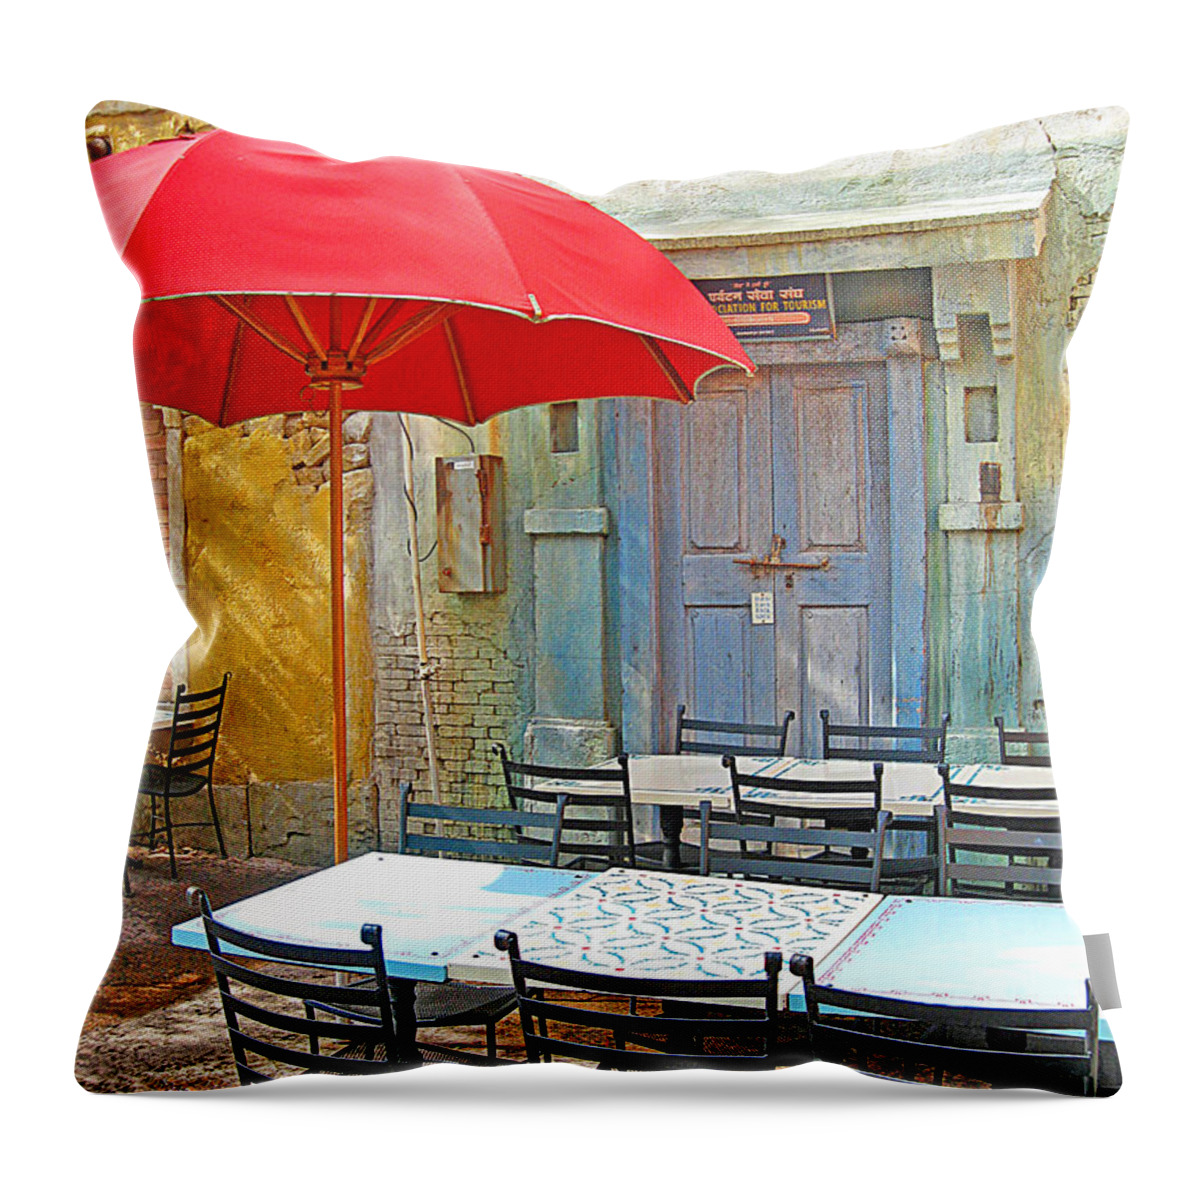 Cafe Throw Pillow featuring the photograph 0345 Animal Kingdom - Disney by Steve Sturgill